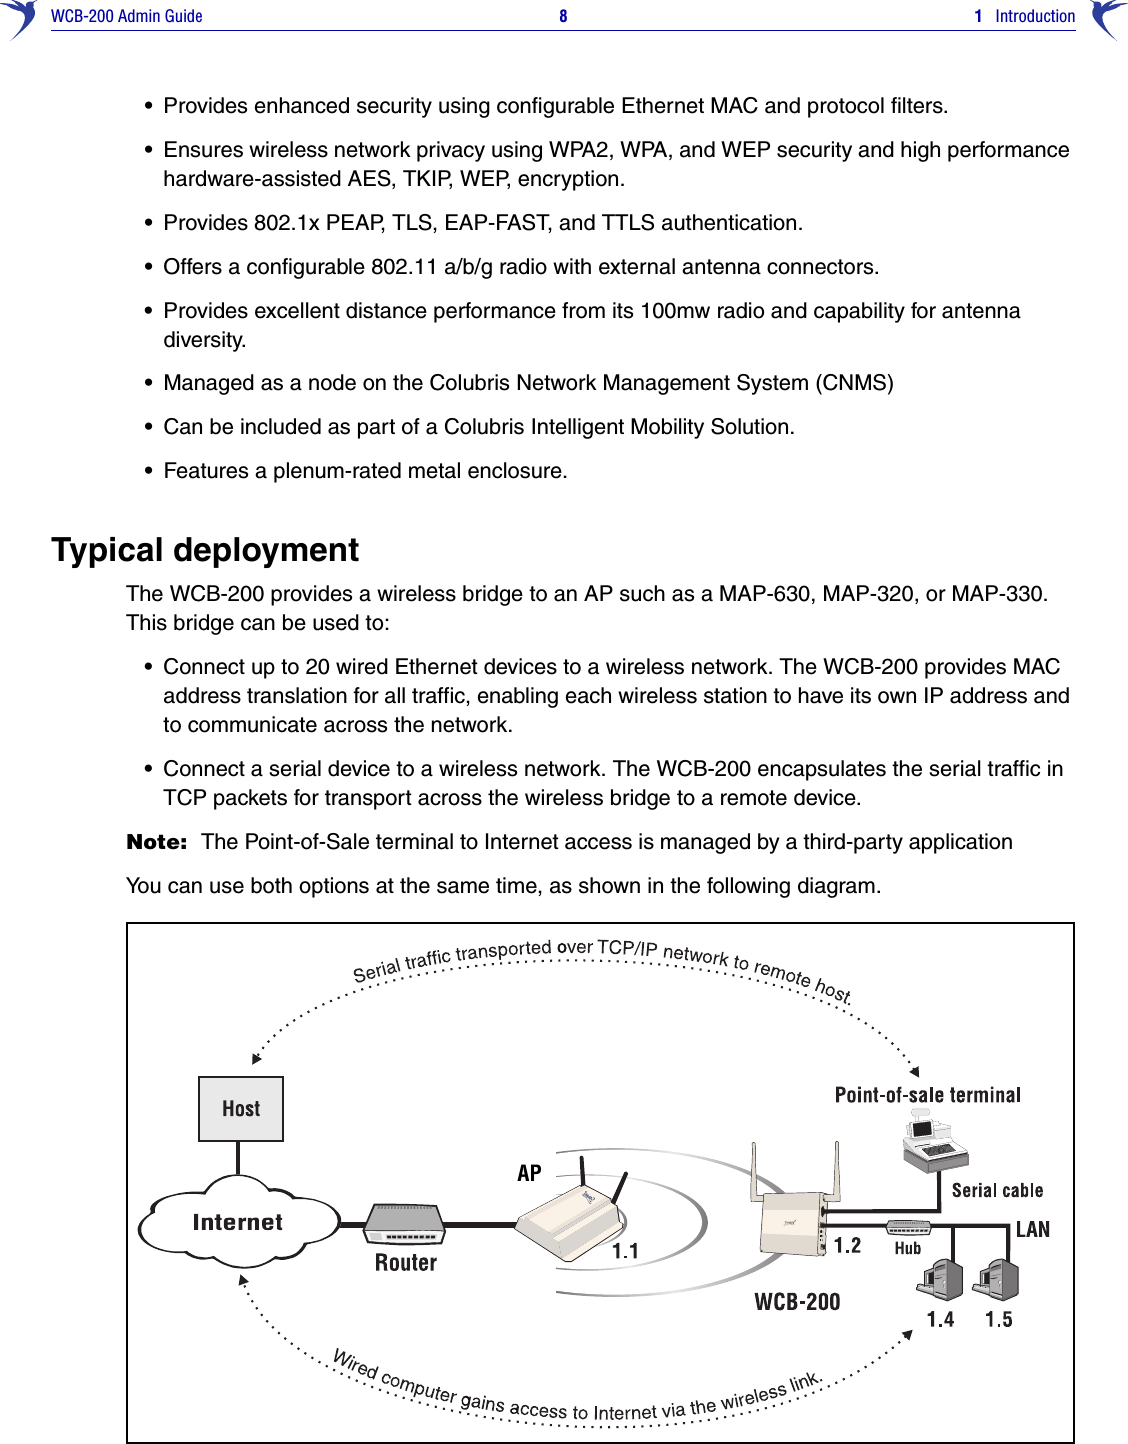 WCB-200 Admin Guide 8 1   Introduction•Provides enhanced security using configurable Ethernet MAC and protocol filters.•Ensures wireless network privacy using WPA2, WPA, and WEP security and high performance hardware-assisted AES, TKIP, WEP, encryption.•Provides 802.1x PEAP, TLS, EAP-FAST, and TTLS authentication.•Offers a configurable 802.11 a/b/g radio with external antenna connectors.•Provides excellent distance performance from its 100mw radio and capability for antenna diversity.•Managed as a node on the Colubris Network Management System (CNMS)•Can be included as part of a Colubris Intelligent Mobility Solution.•Features a plenum-rated metal enclosure.Typical deploymentThe WCB-200 provides a wireless bridge to an AP such as a MAP-630, MAP-320, or MAP-330. This bridge can be used to:•Connect up to 20 wired Ethernet devices to a wireless network. The WCB-200 provides MAC address translation for all traffic, enabling each wireless station to have its own IP address and to communicate across the network.•Connect a serial device to a wireless network. The WCB-200 encapsulates the serial traffic in TCP packets for transport across the wireless bridge to a remote device.Note: The Point-of-Sale terminal to Internet access is managed by a third-party applicationYou can use both options at the same time, as shown in the following diagram.AP